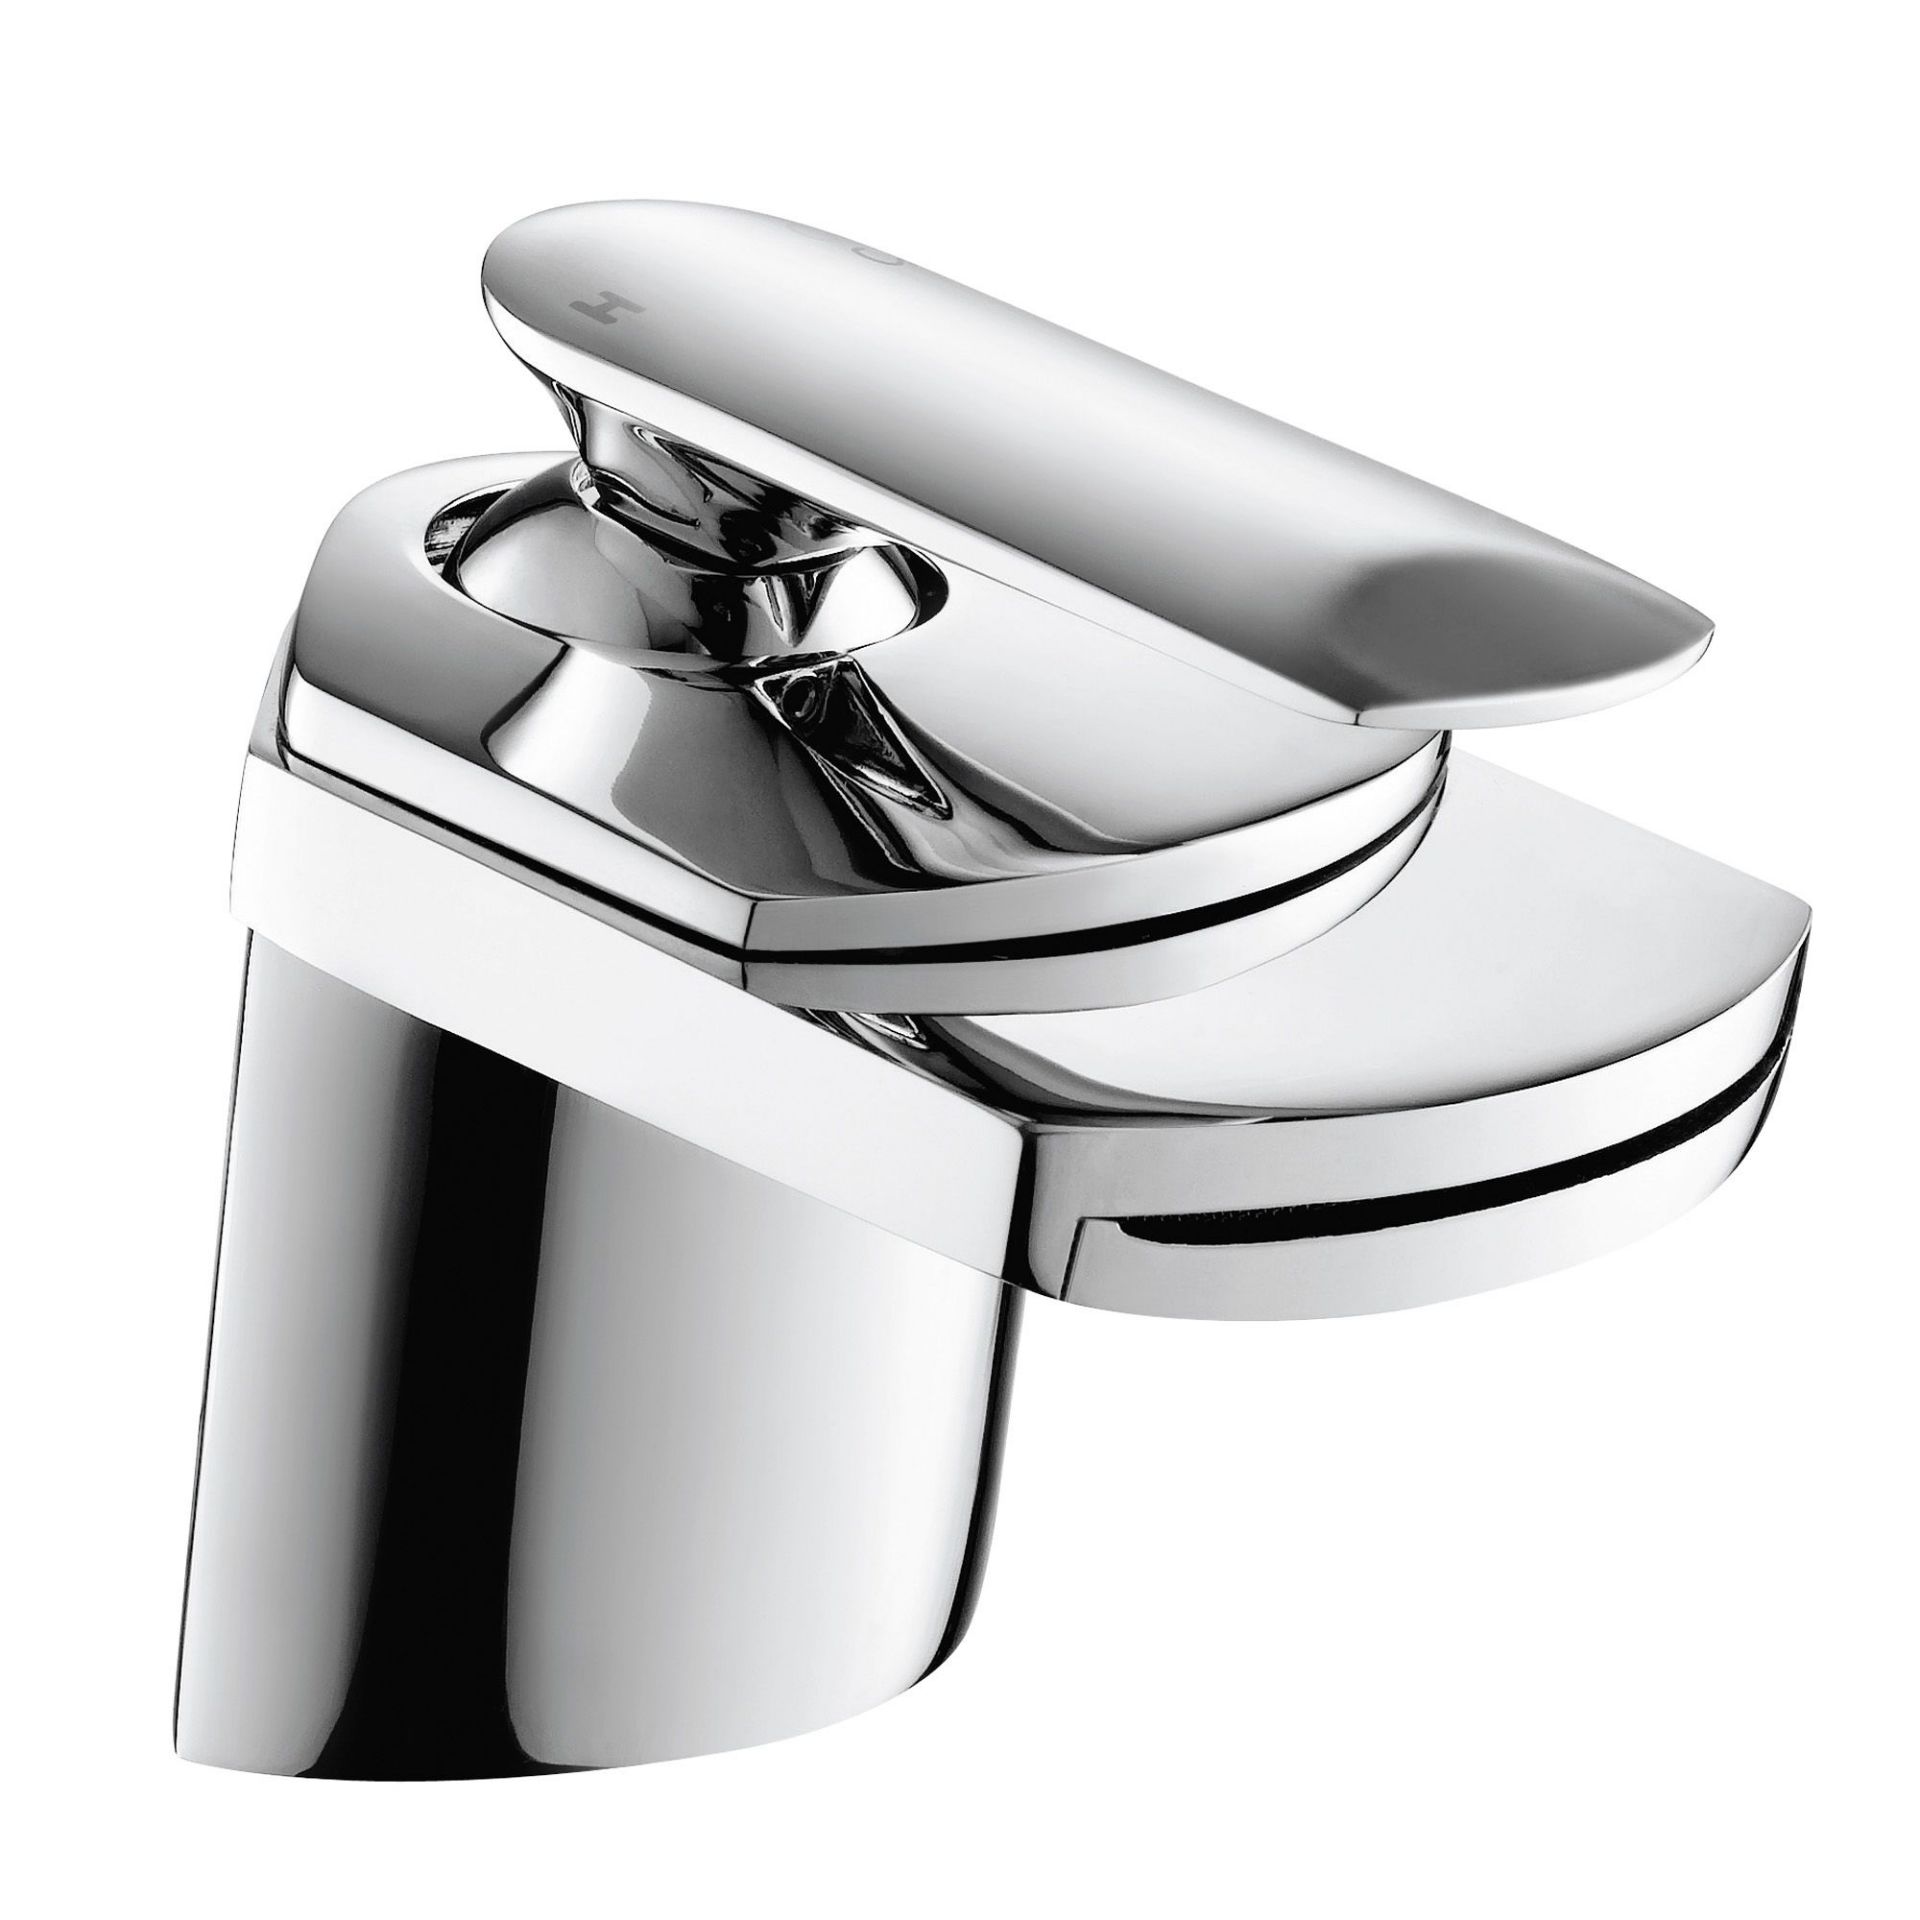 (ZL42) Oshi Waterfall Basin Mixer Tap We love this because it has its own individual style. It - Image 2 of 3